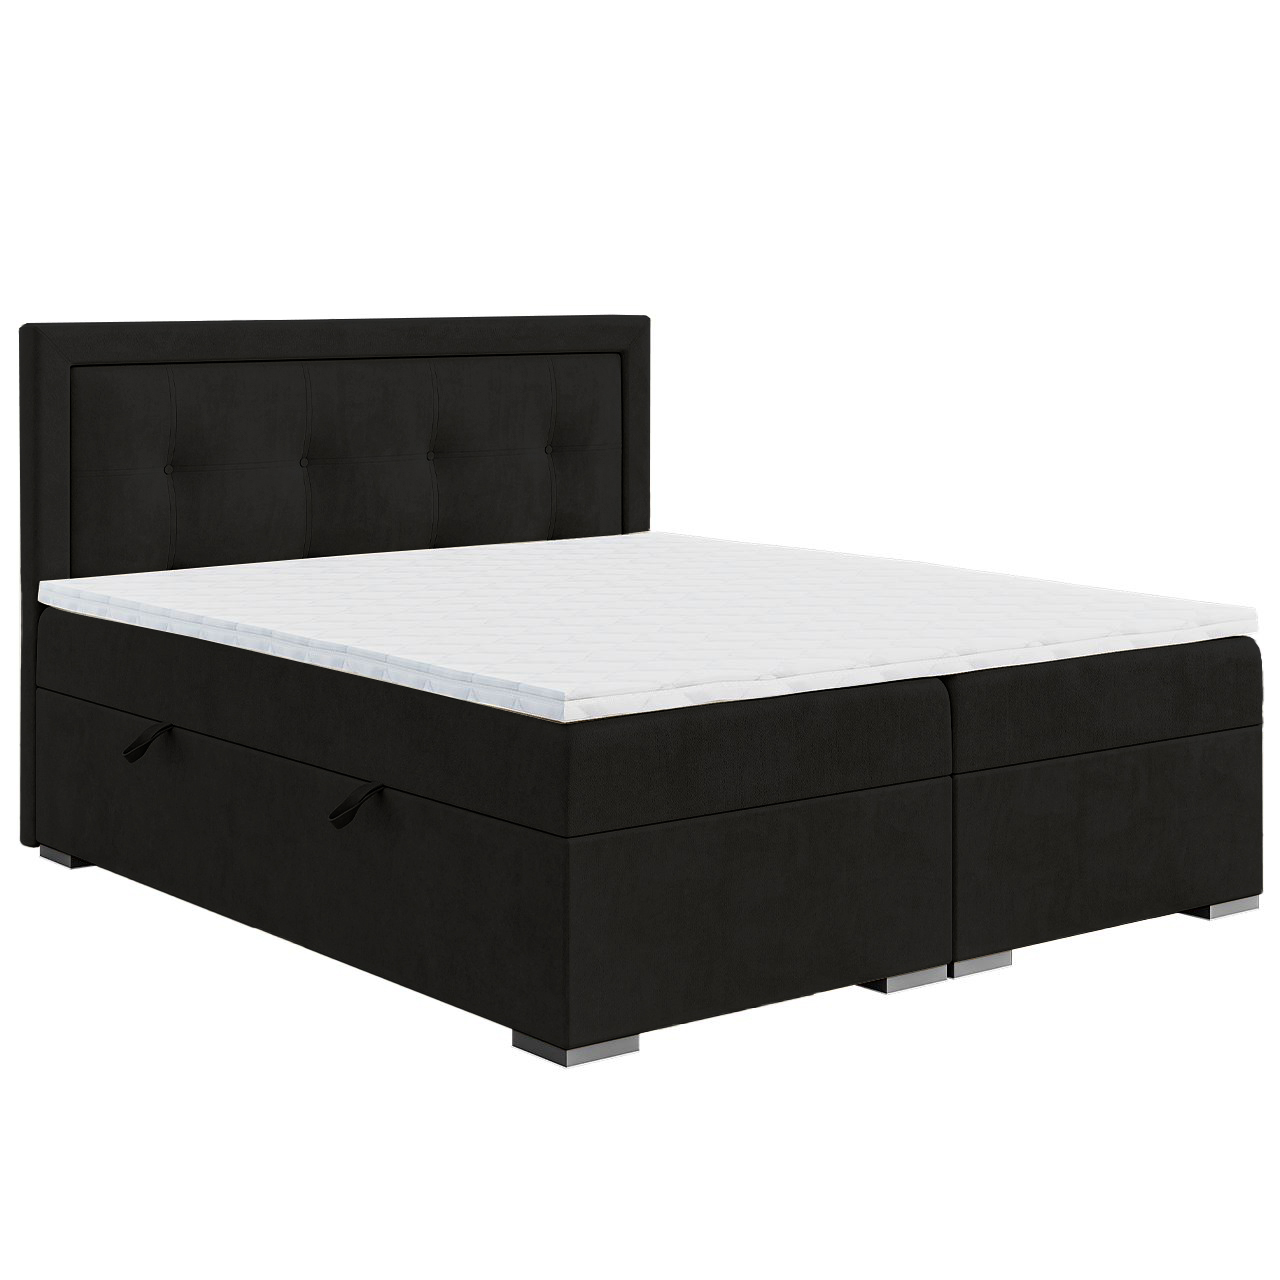 Upholstered bed VERI 140x200 riviera 100